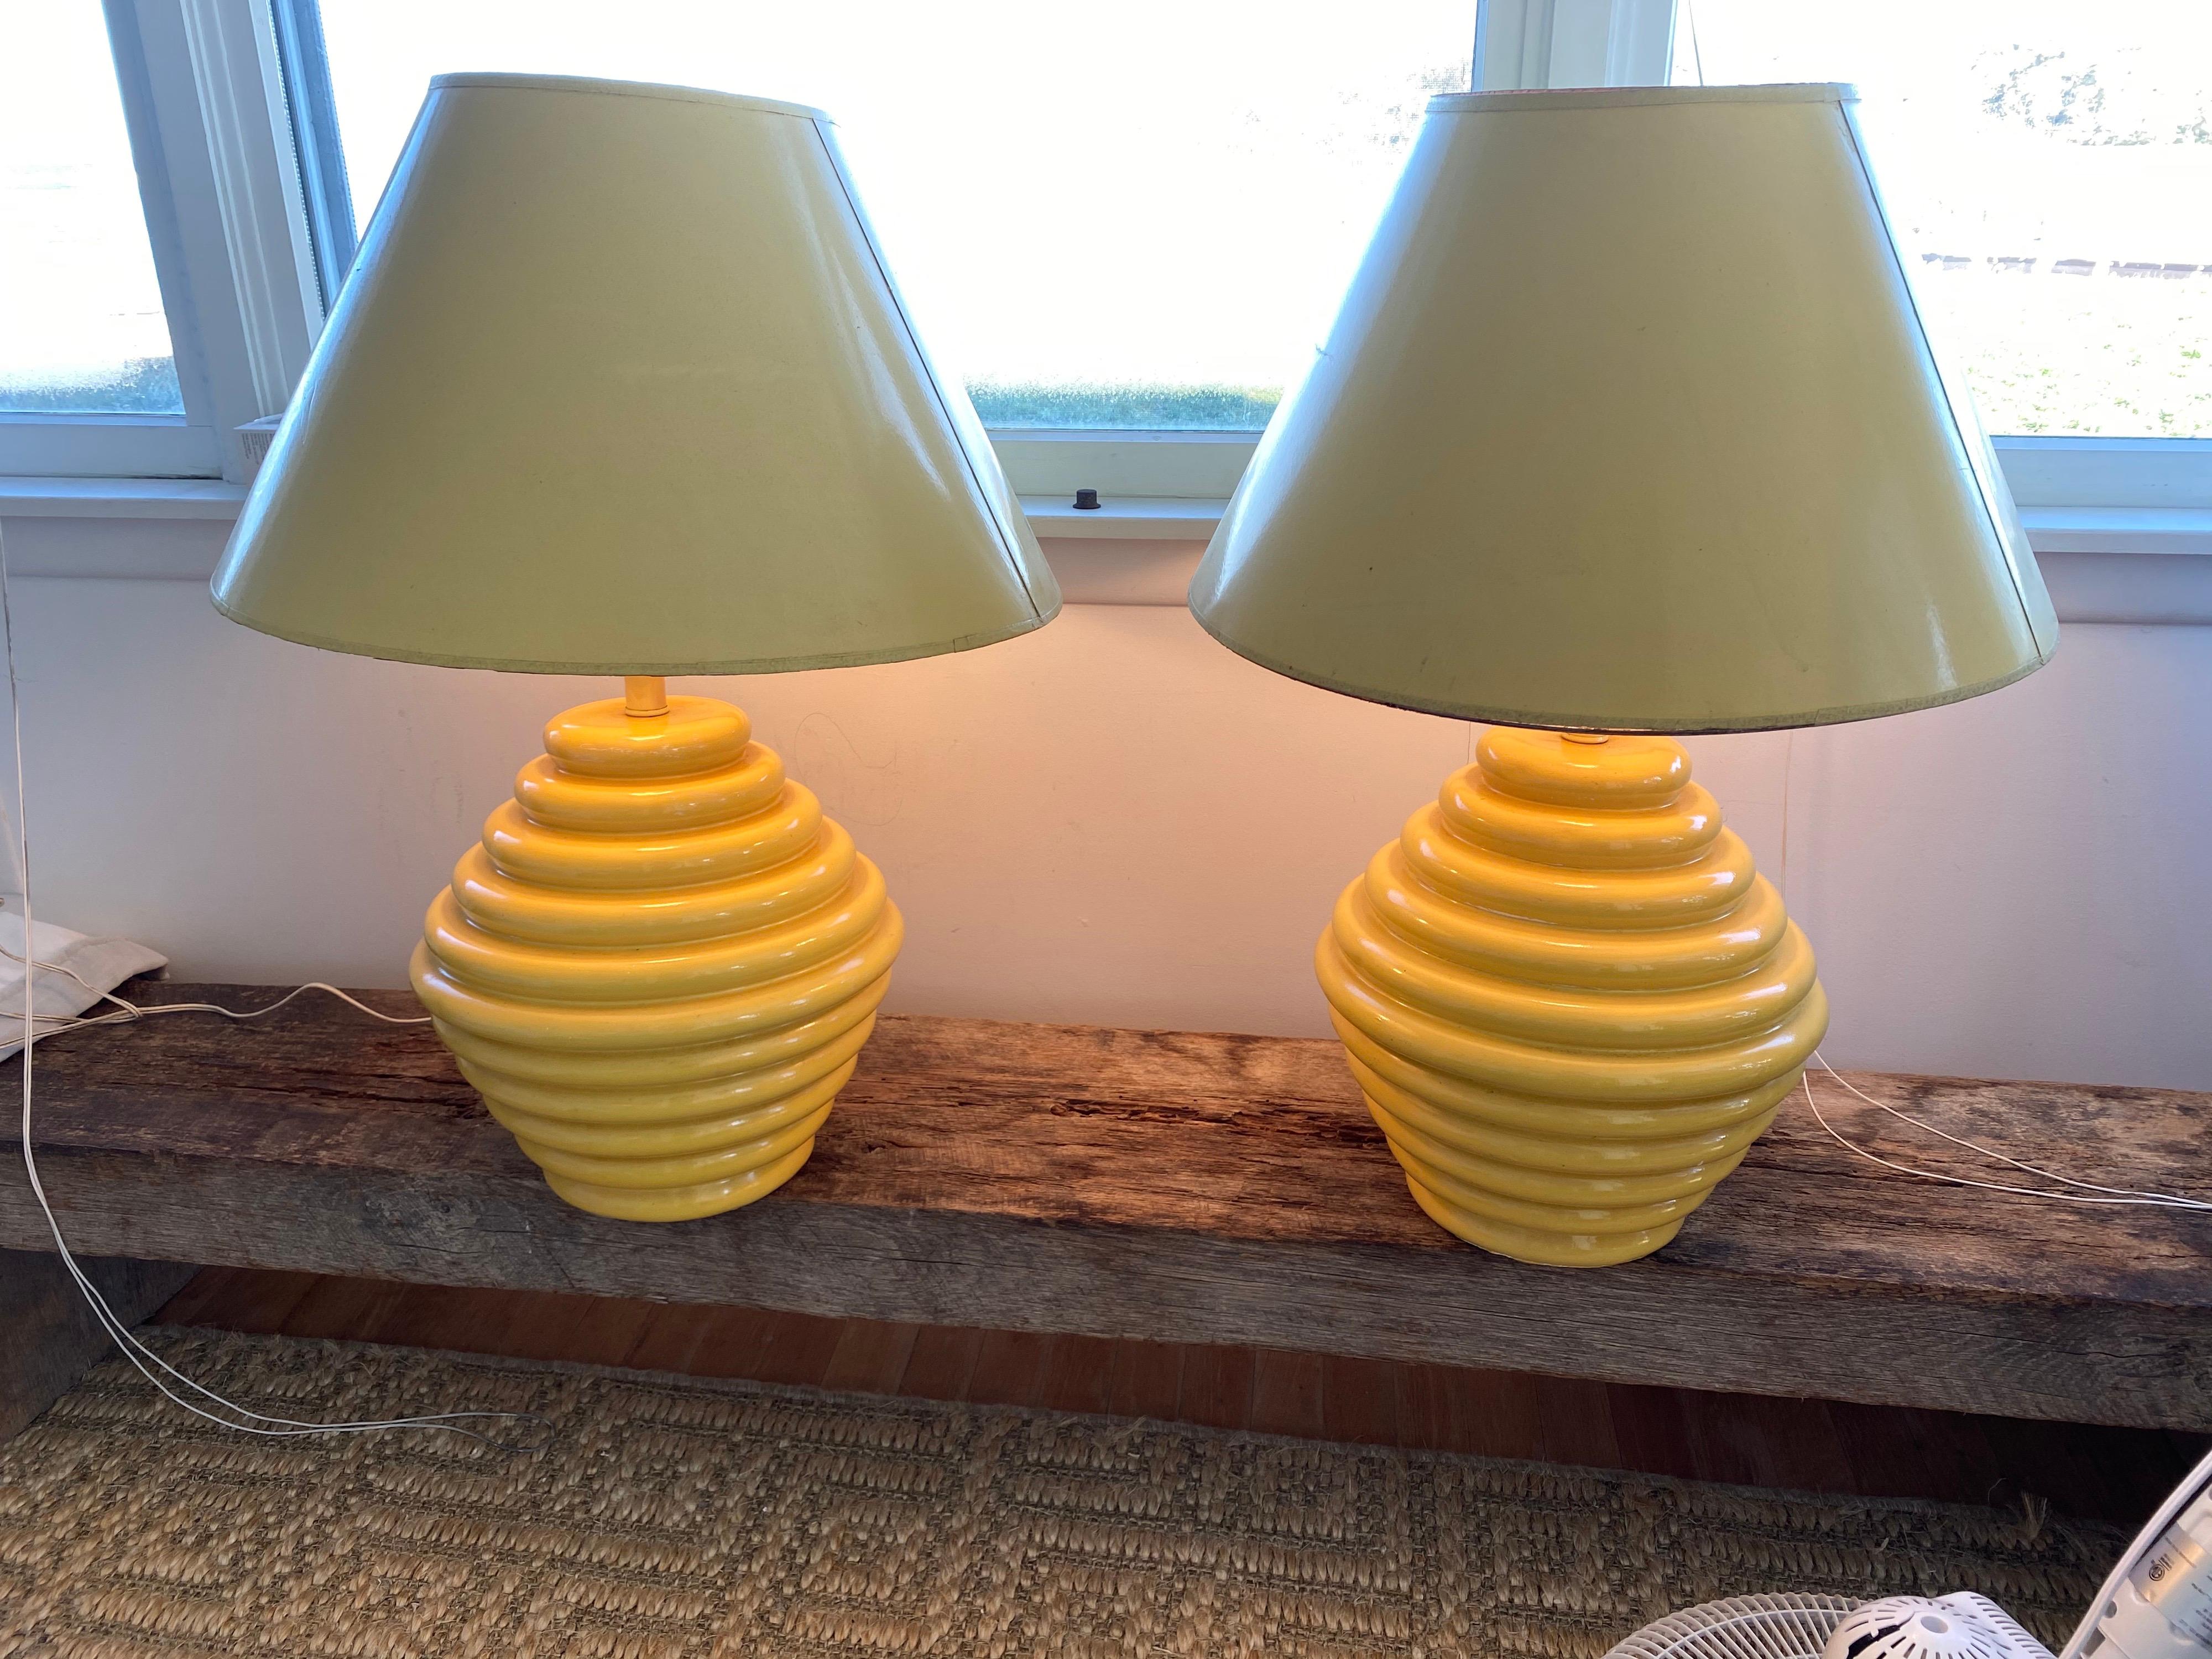 Pair of 1960s ceramic Beehive yellow lamps.
Spunky yellow color beehive ceramic bases in good working condition. Original shades shown in photos are quite worn out and not included. 

Measures: 13.5” diameter x 13” high base
20” diameter x 12.5”